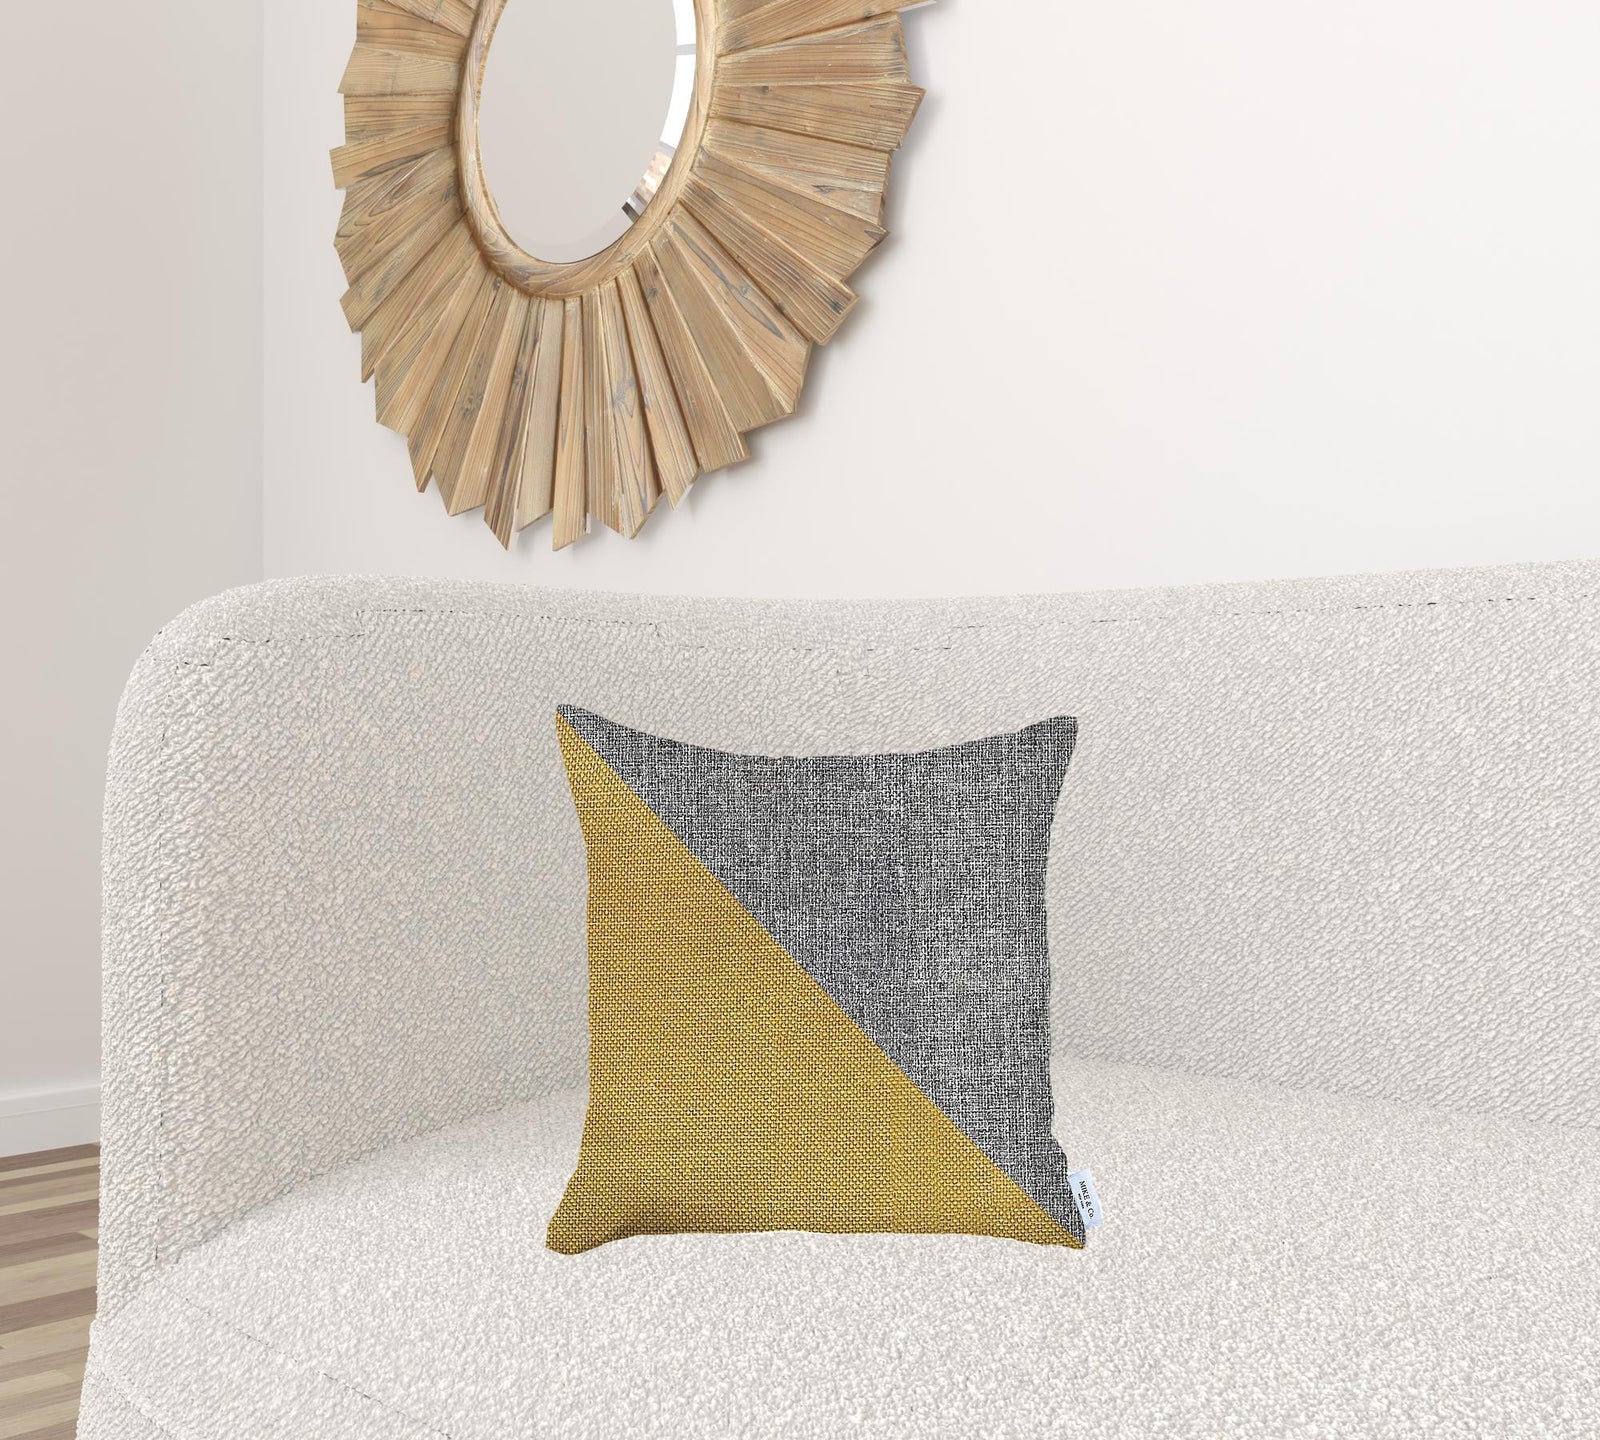 18" X 18" Grey And Yellow Geometric Zippered Handmade Polyester Throw Pillow Cover